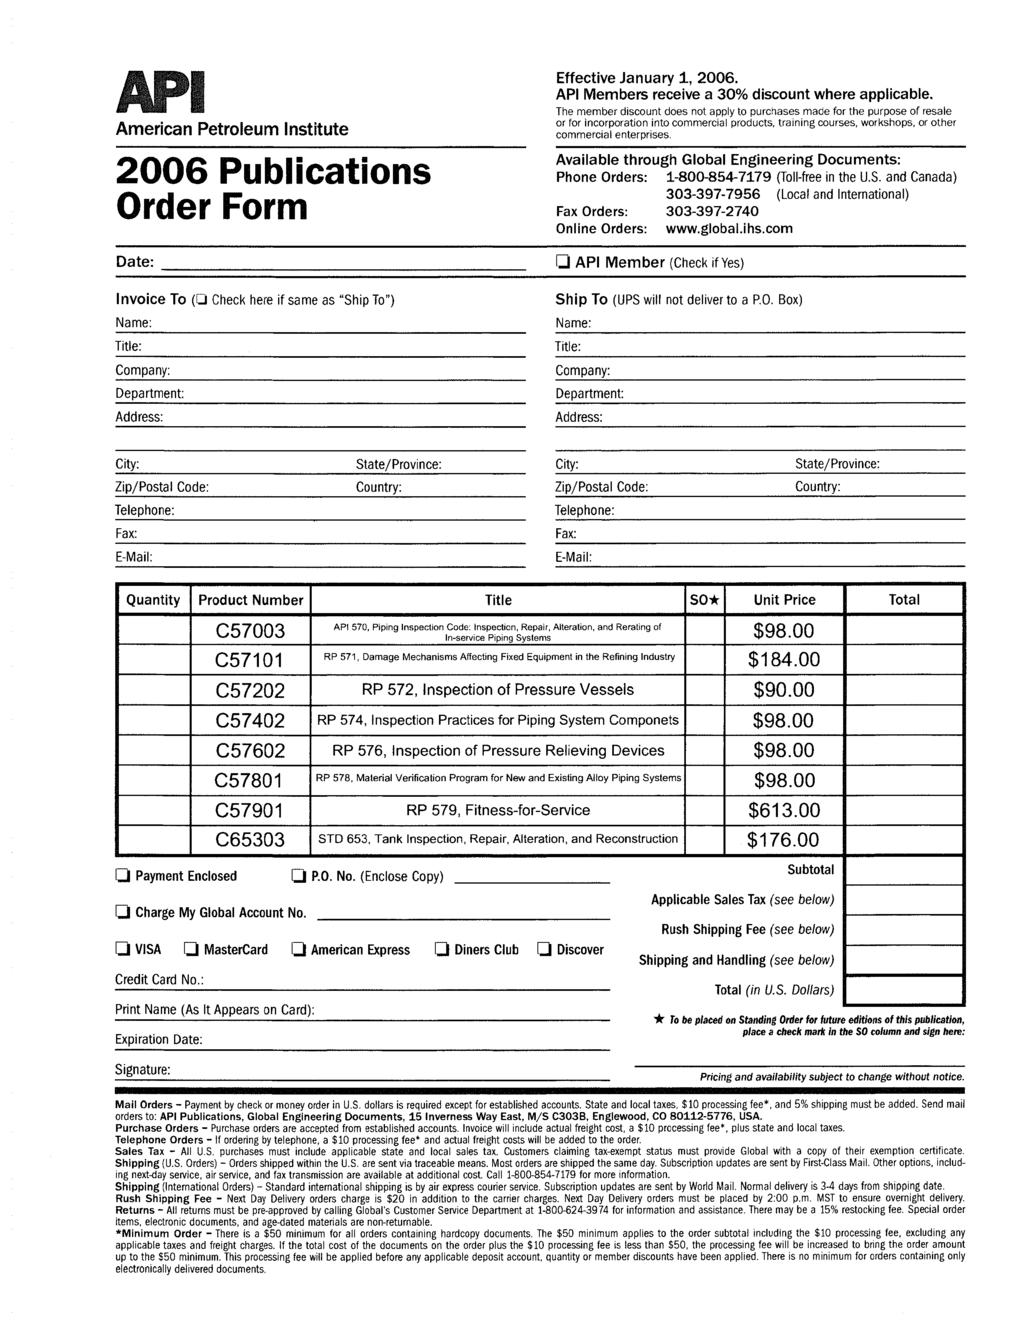 American Petroleum Institute 2006 Publications Order Form Effective January 1, 2006. API Members receive a 30% discount where applicable.